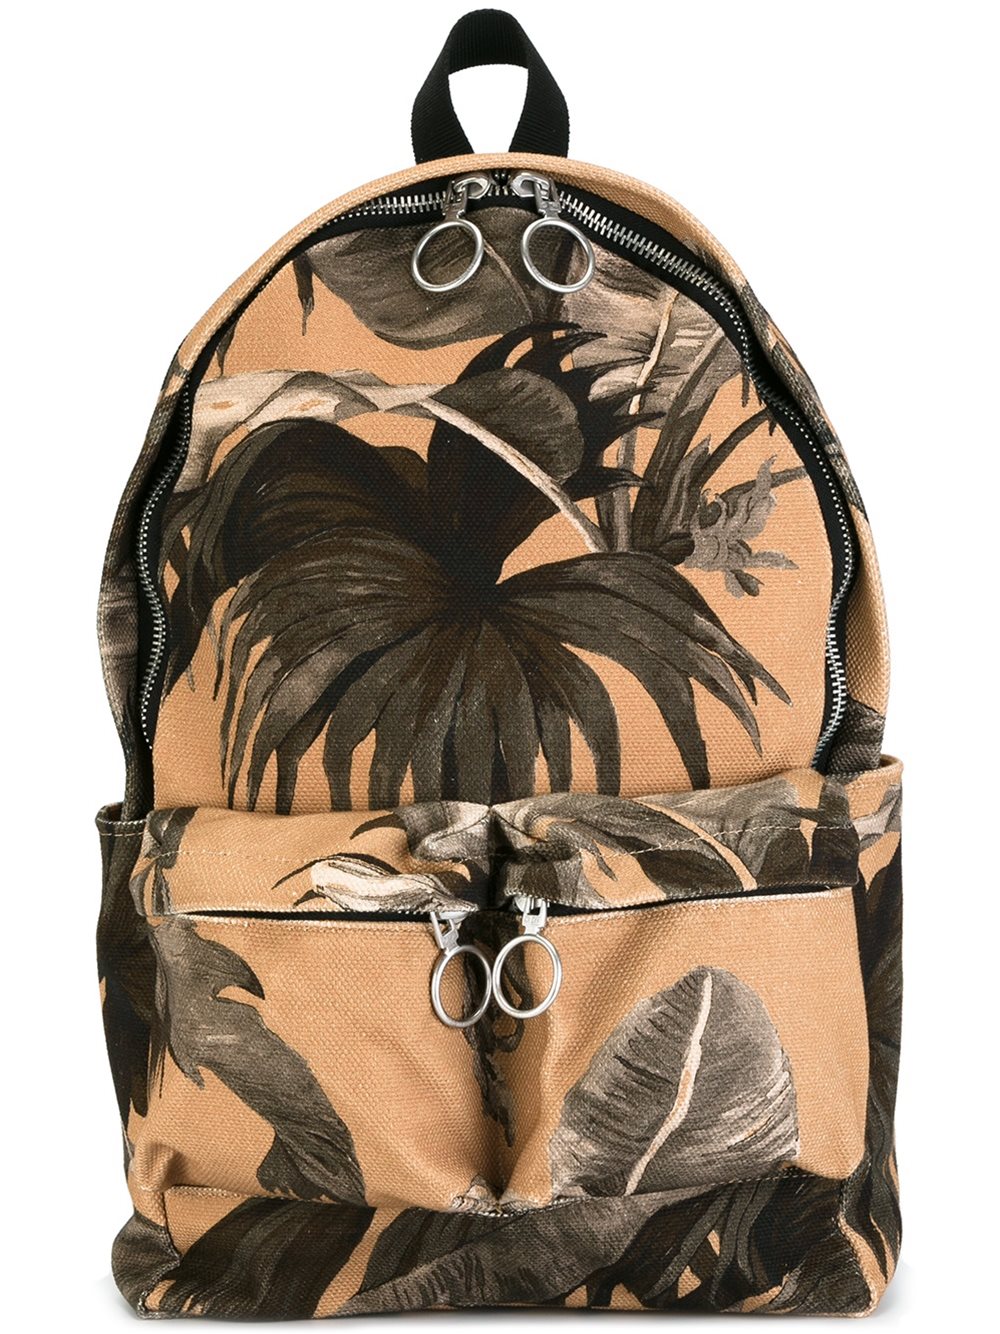 Off-White palm print backpack 9988 Women Bags Backpacks [OW428] - $119.